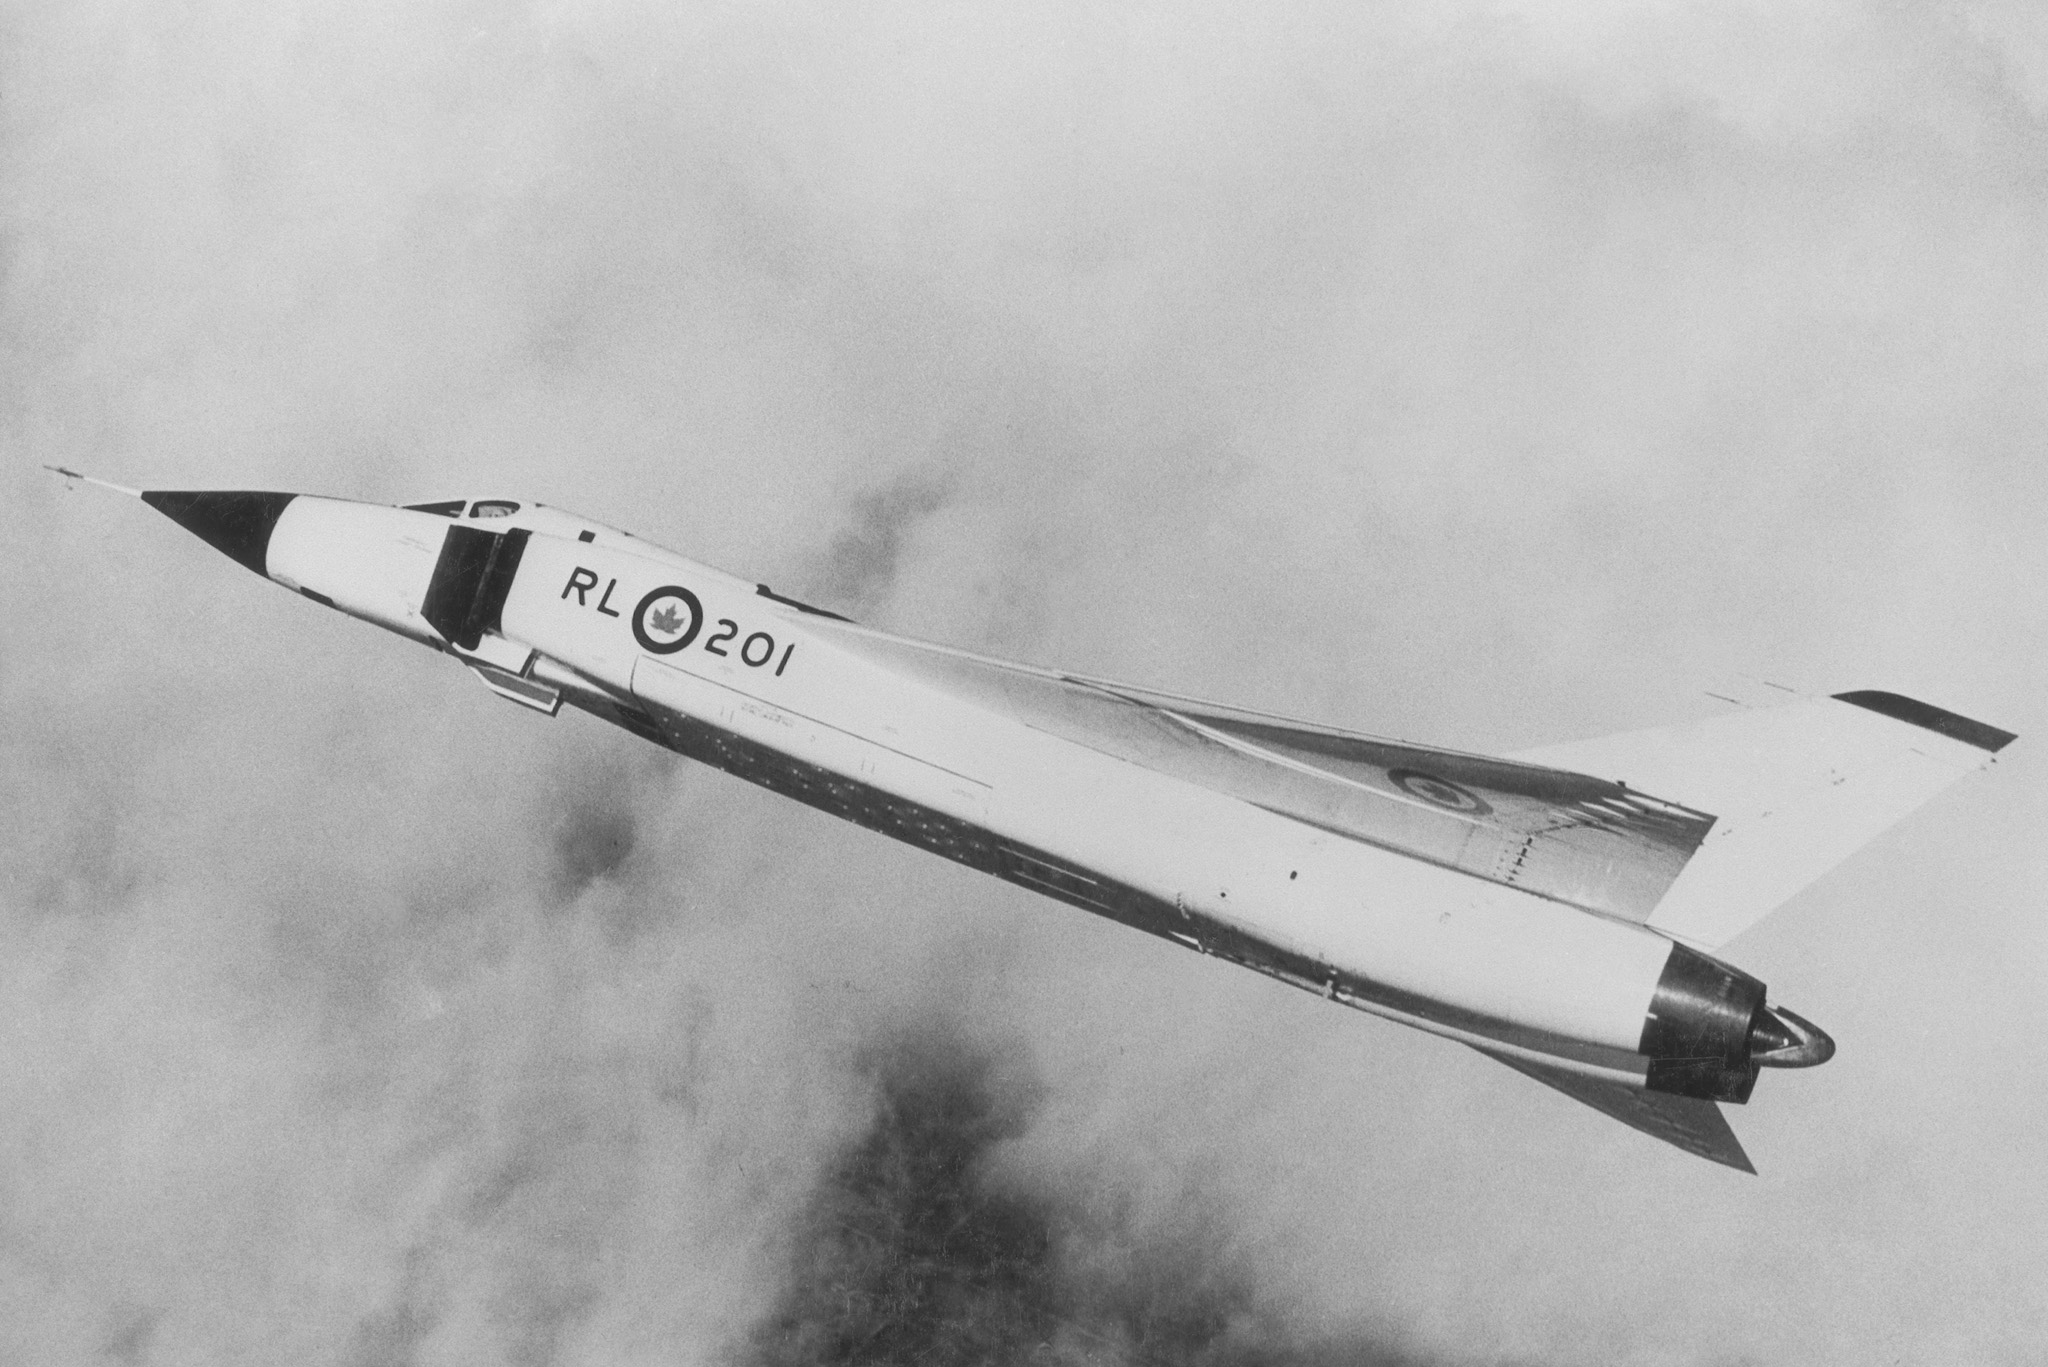 From the Avro Arrow to the Gimli Glider